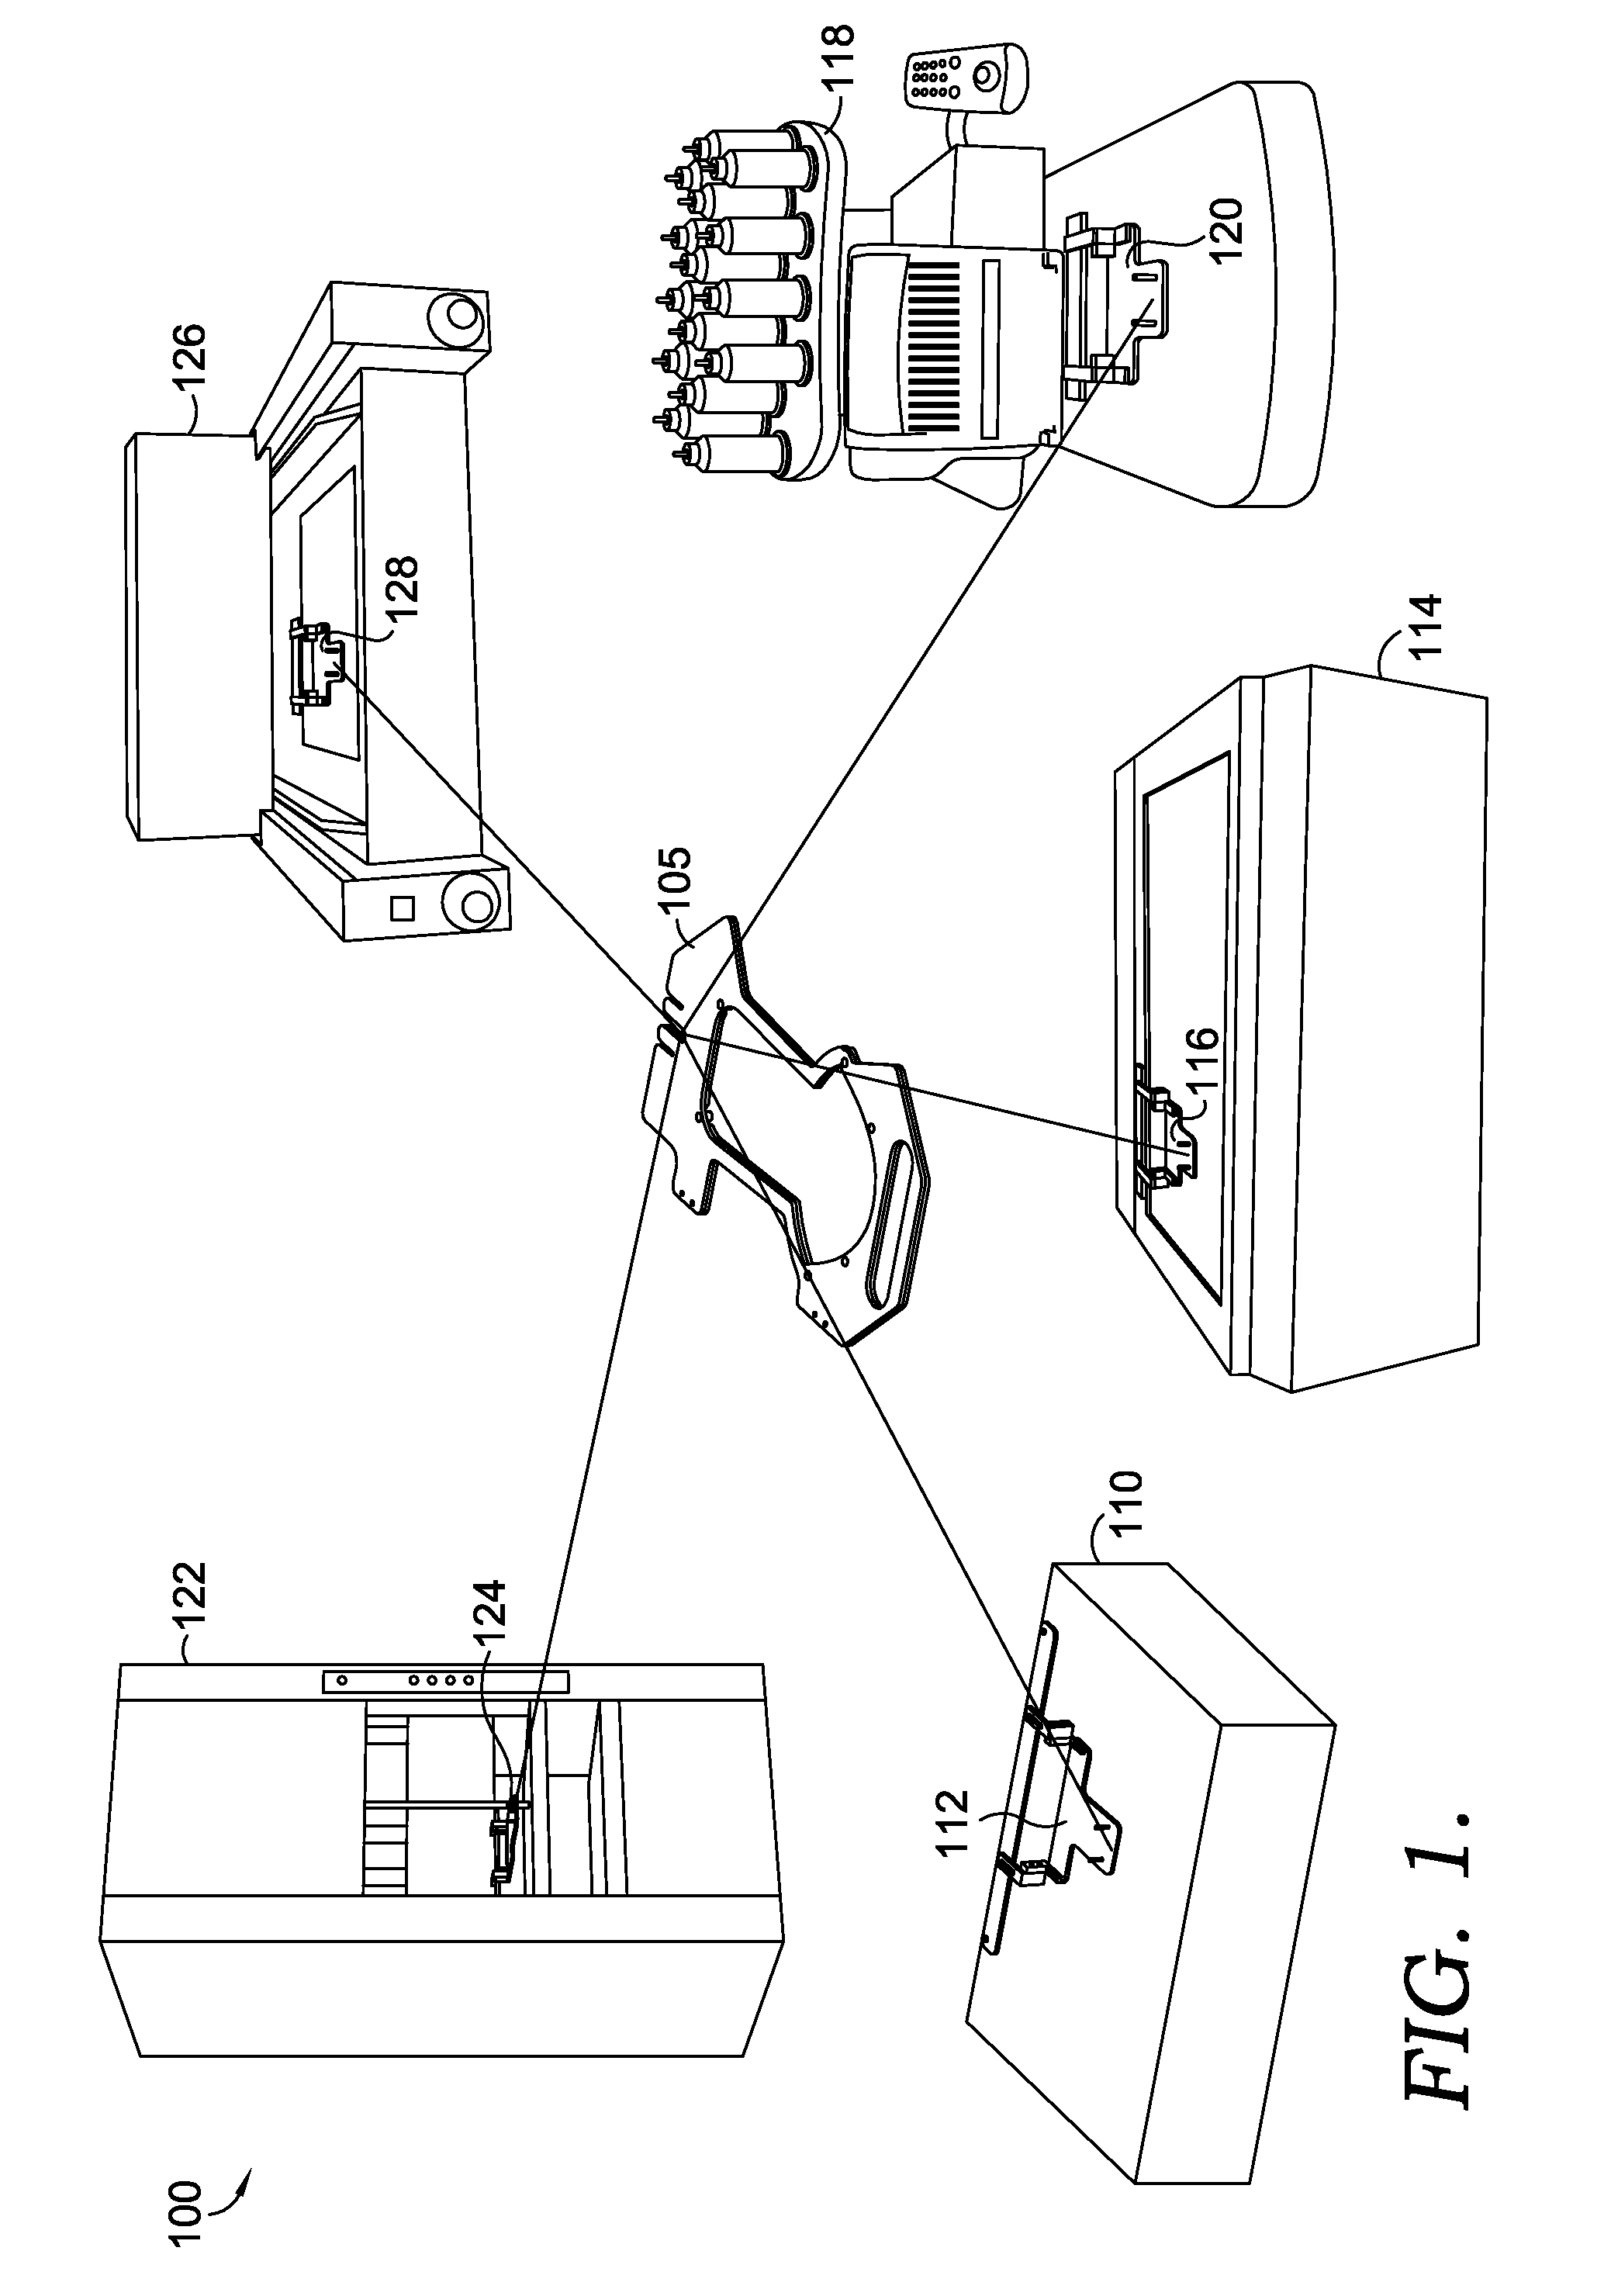 Unitary multi-use alignment fixture for shoe production